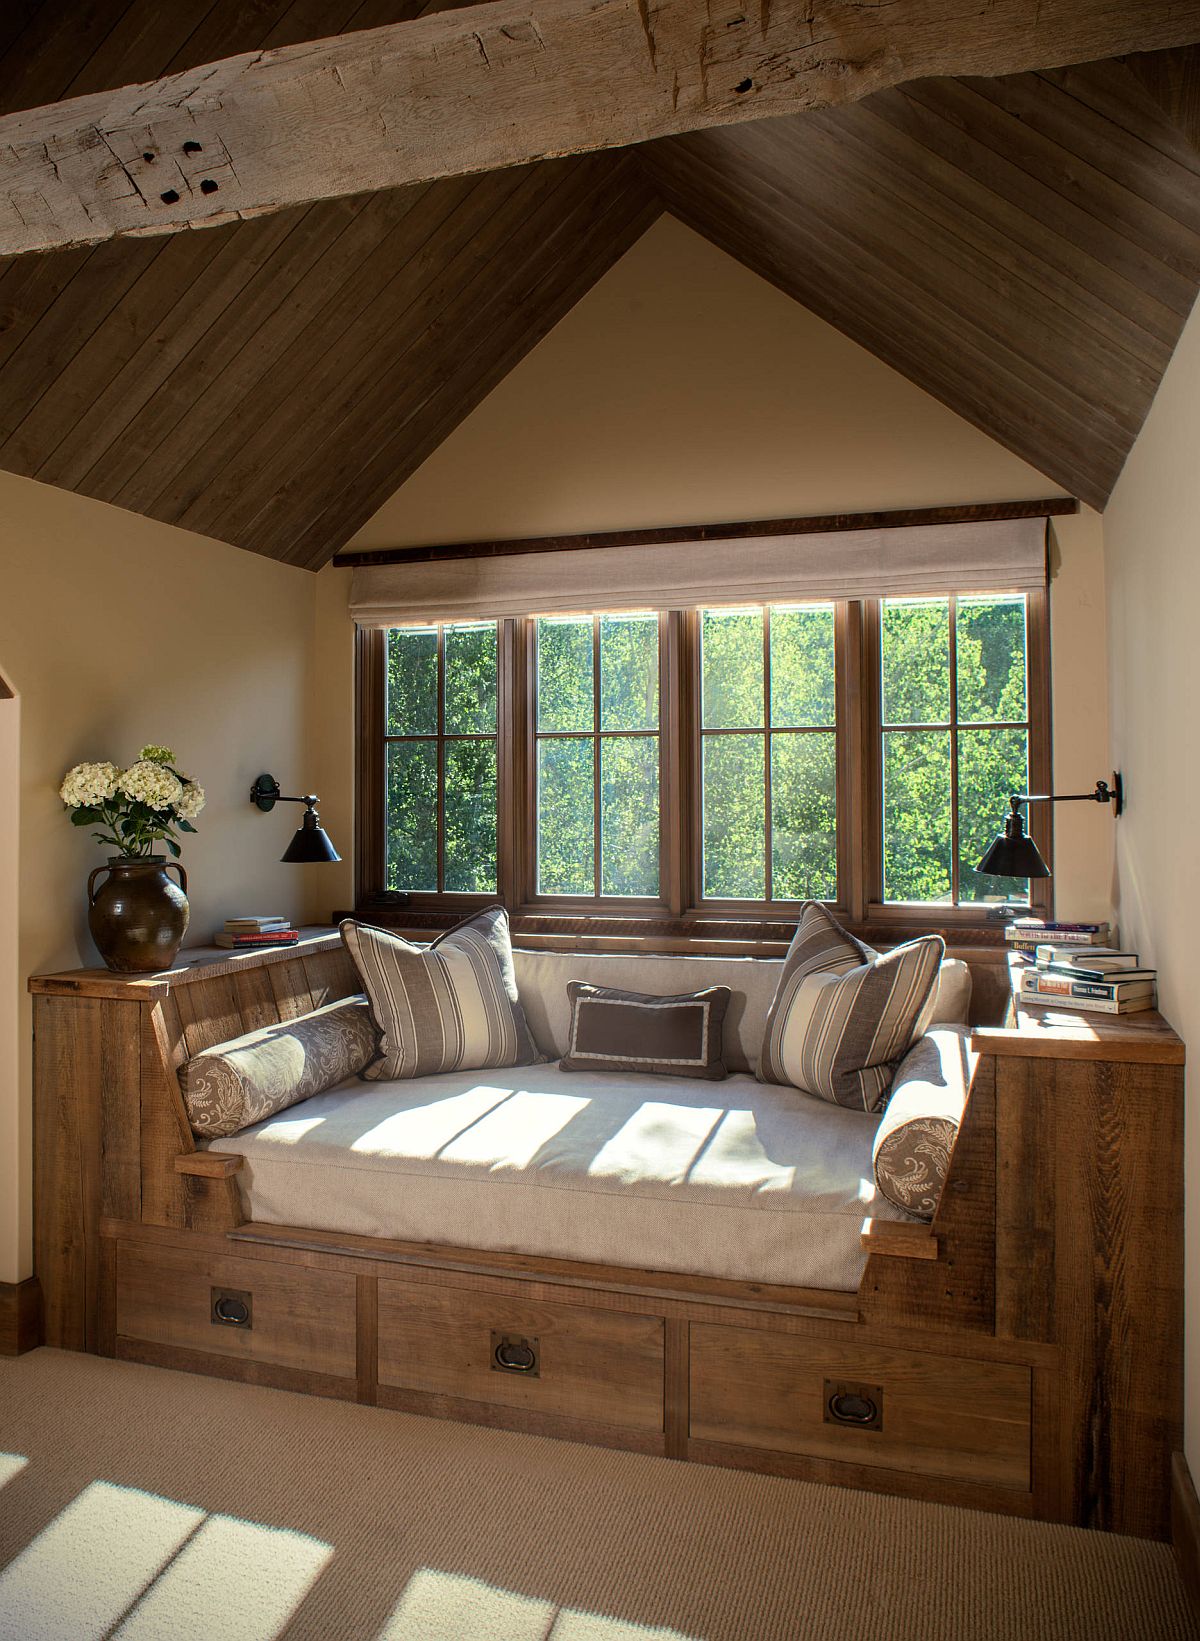 Turn the niche in the attic bedroom into a comfortable reading nook using built-in seating